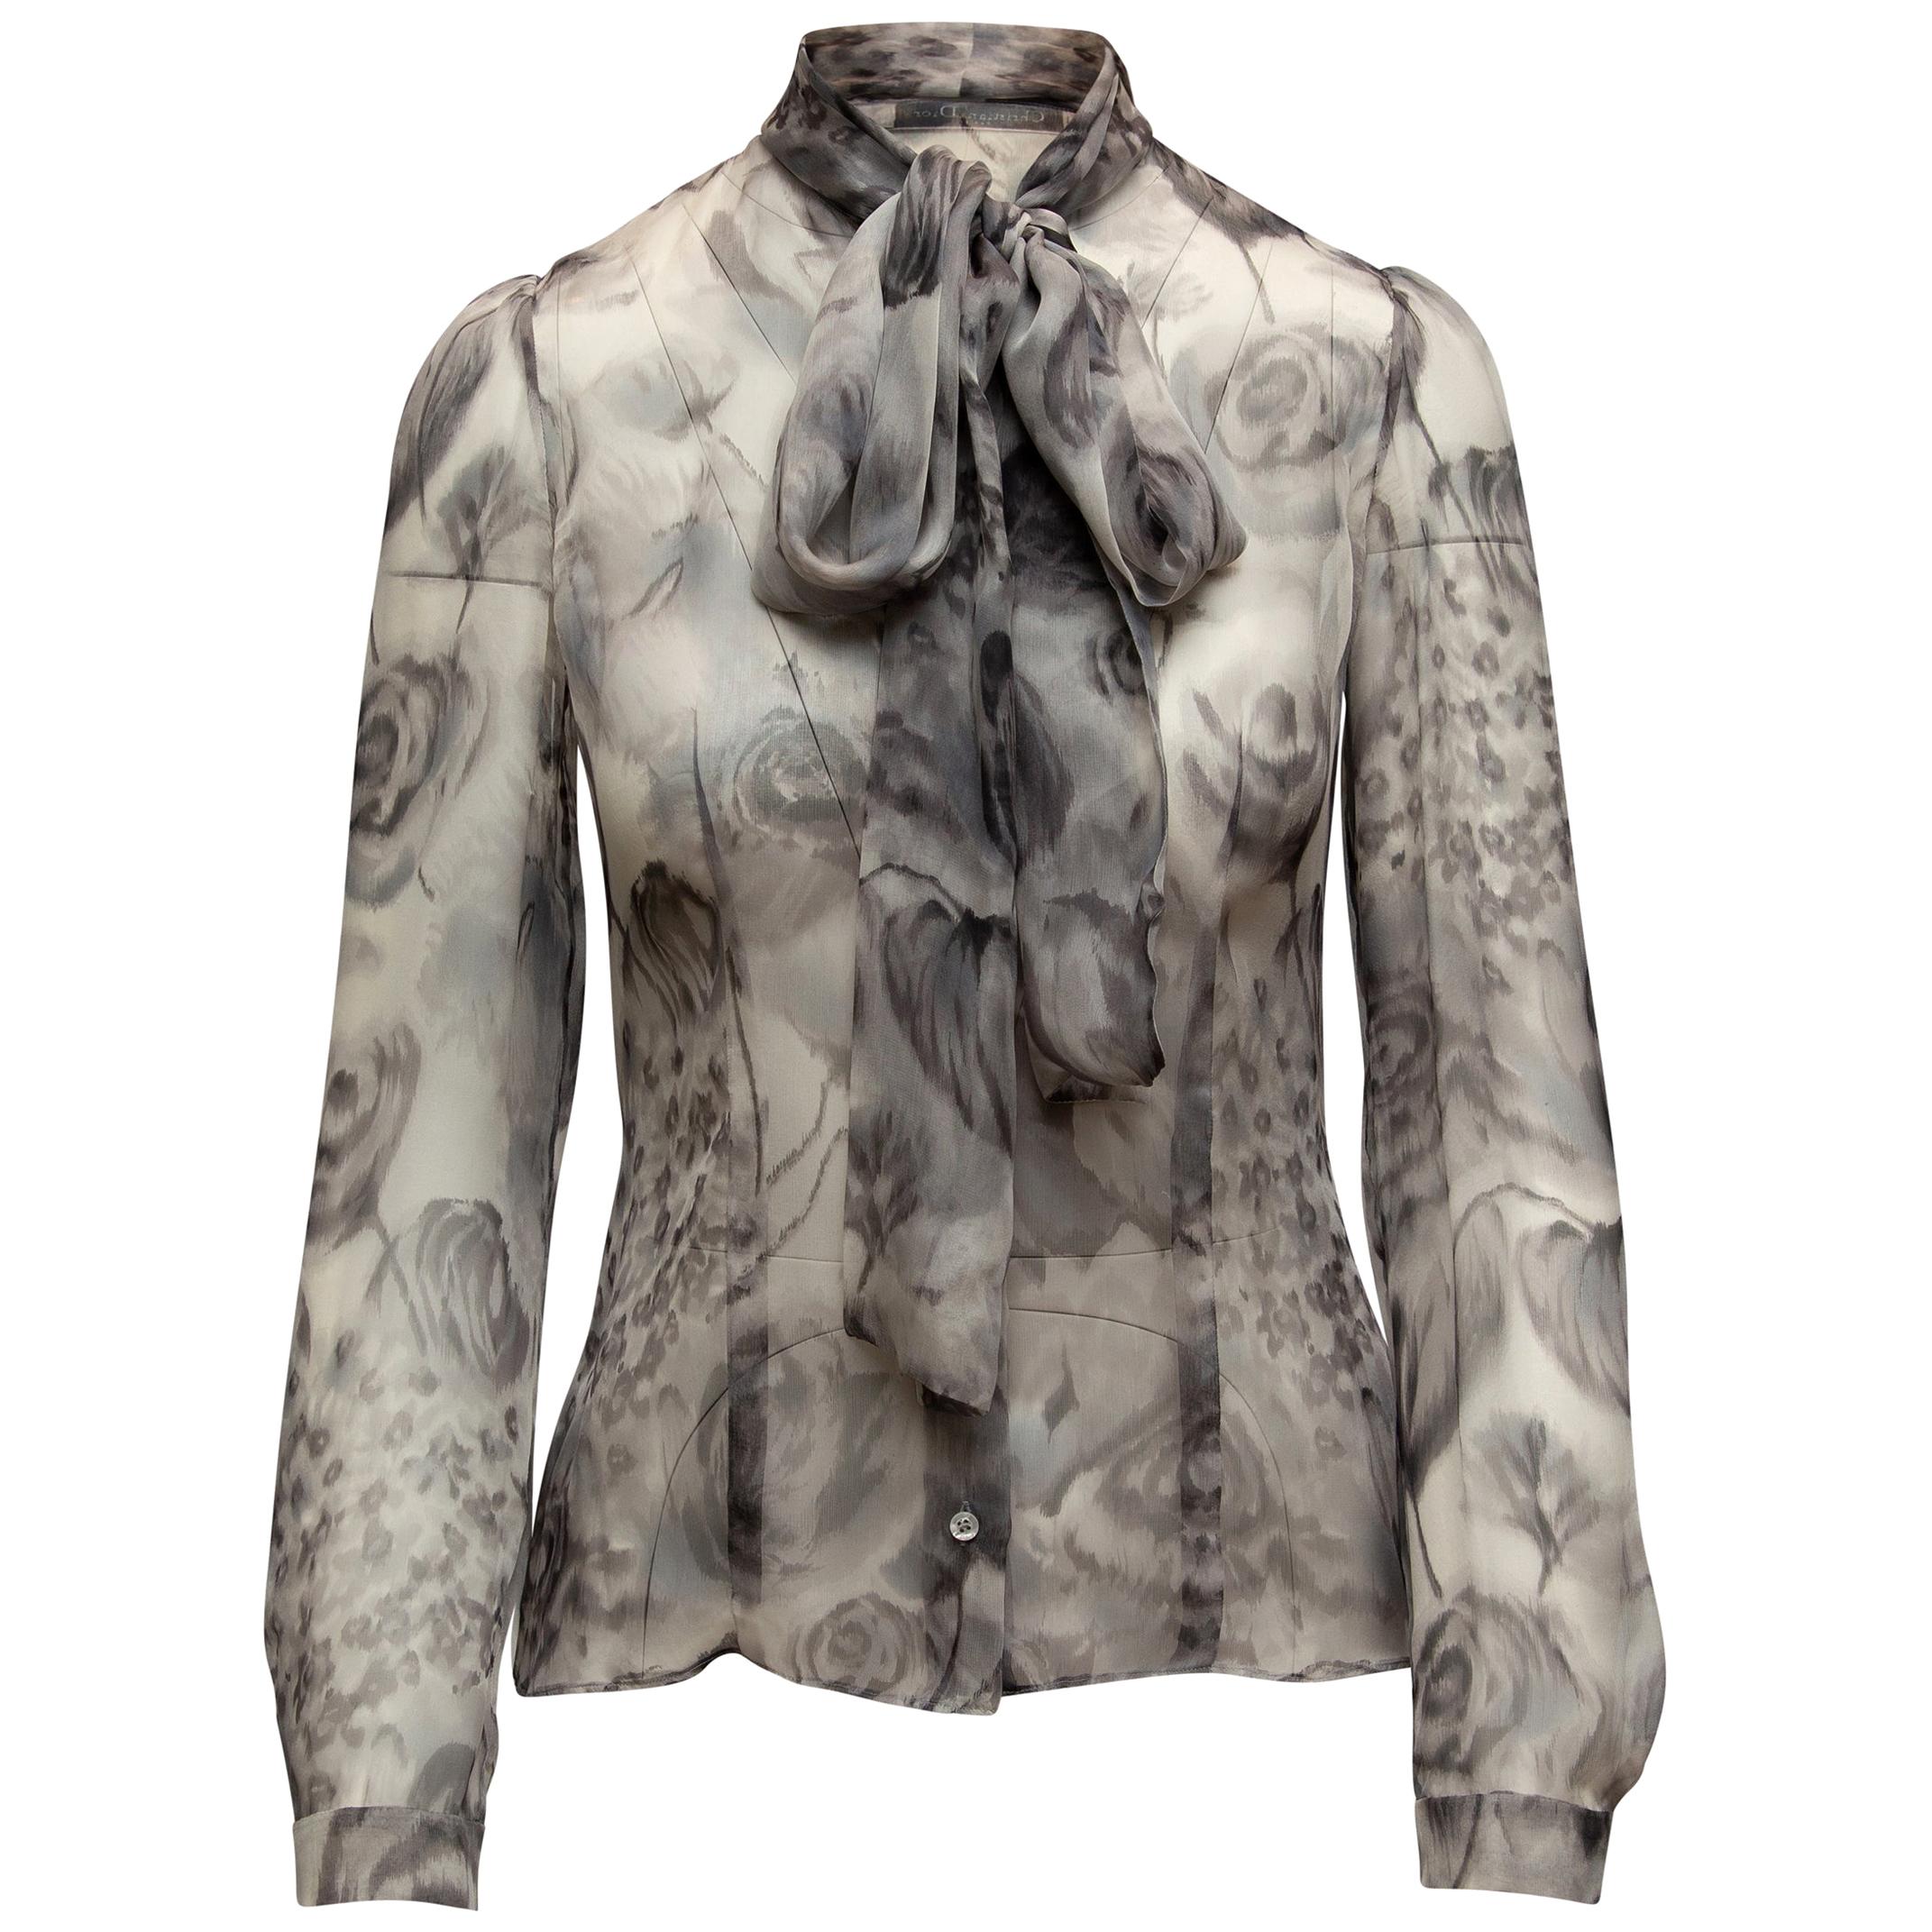 Christian Dior Grey Floral Print Pussy Bow Blouse